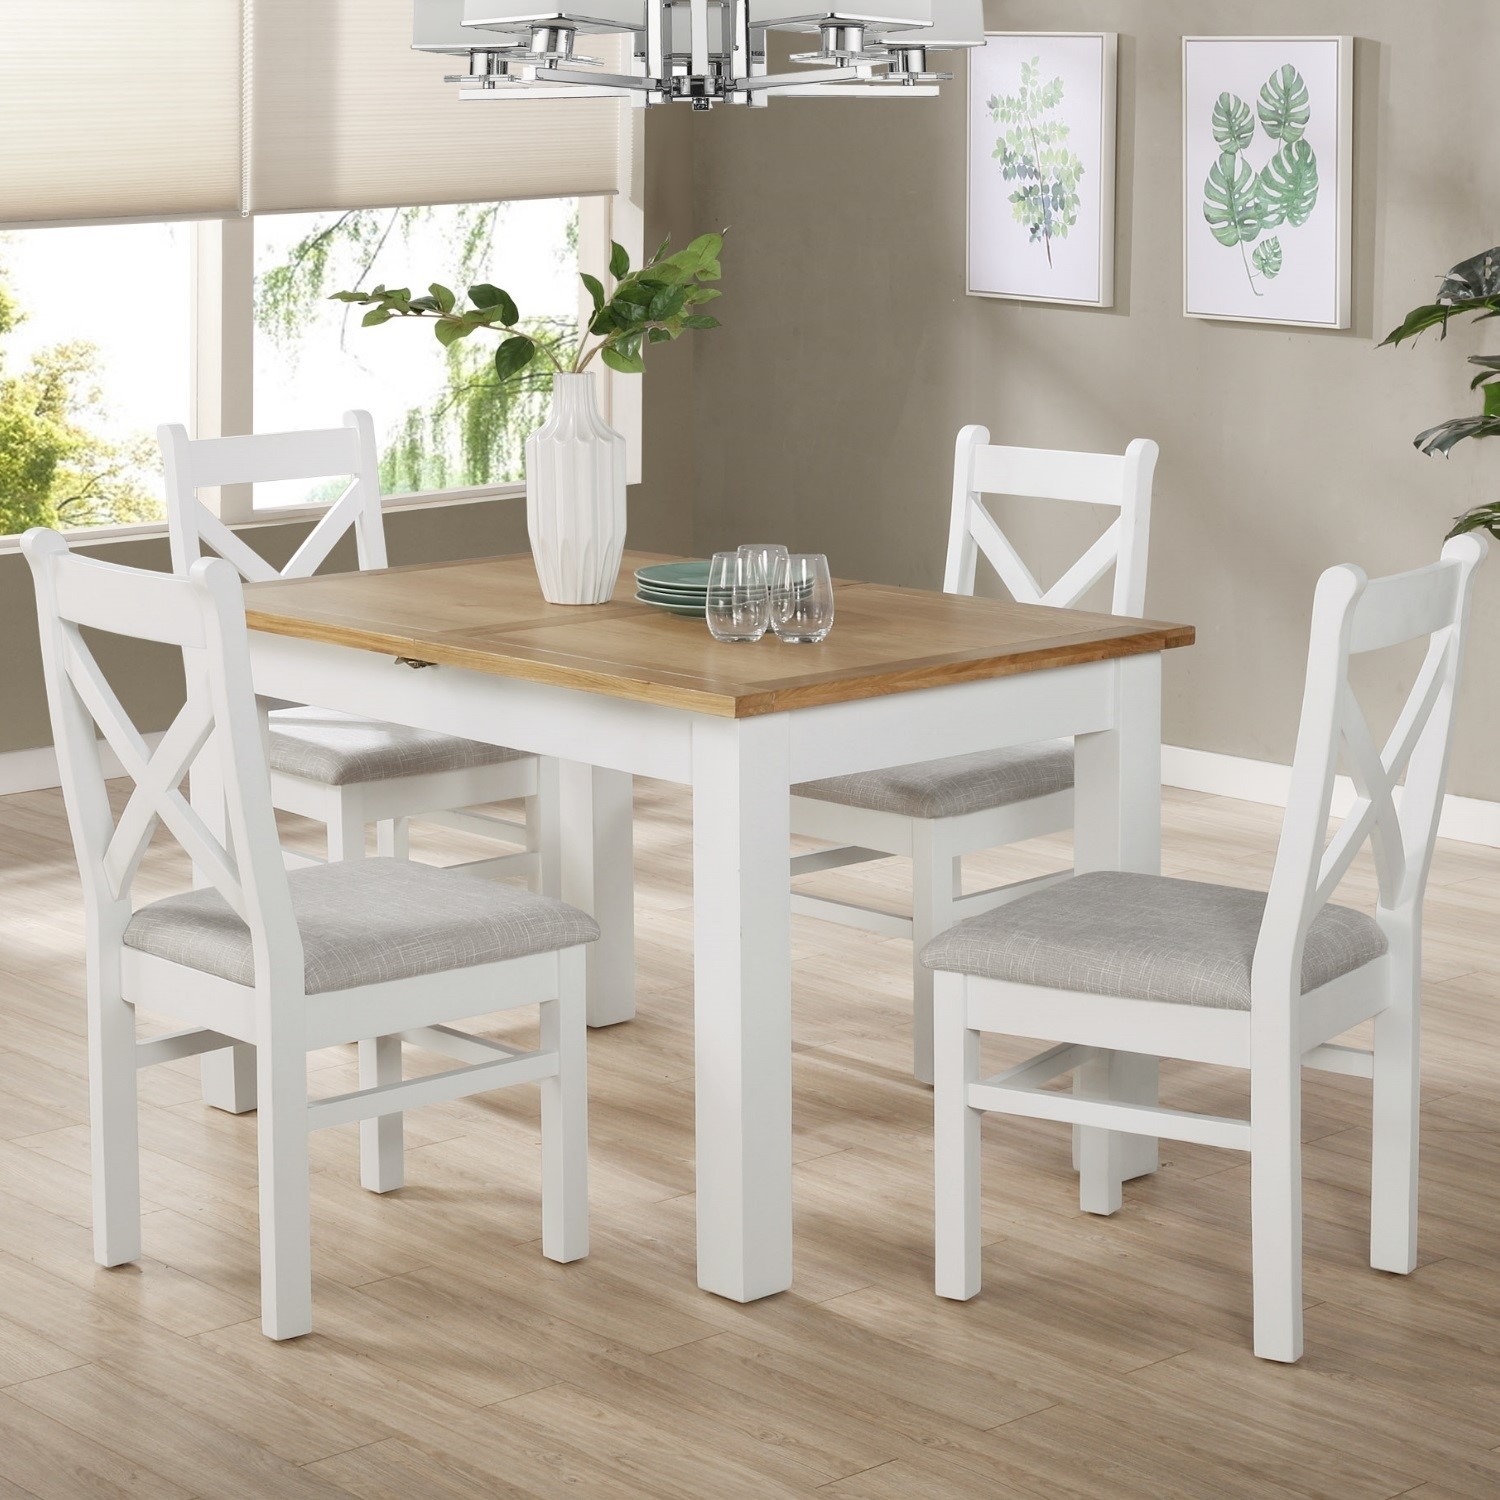 Unbelievable Collections Of White Dining Room Table And Chairs Concept